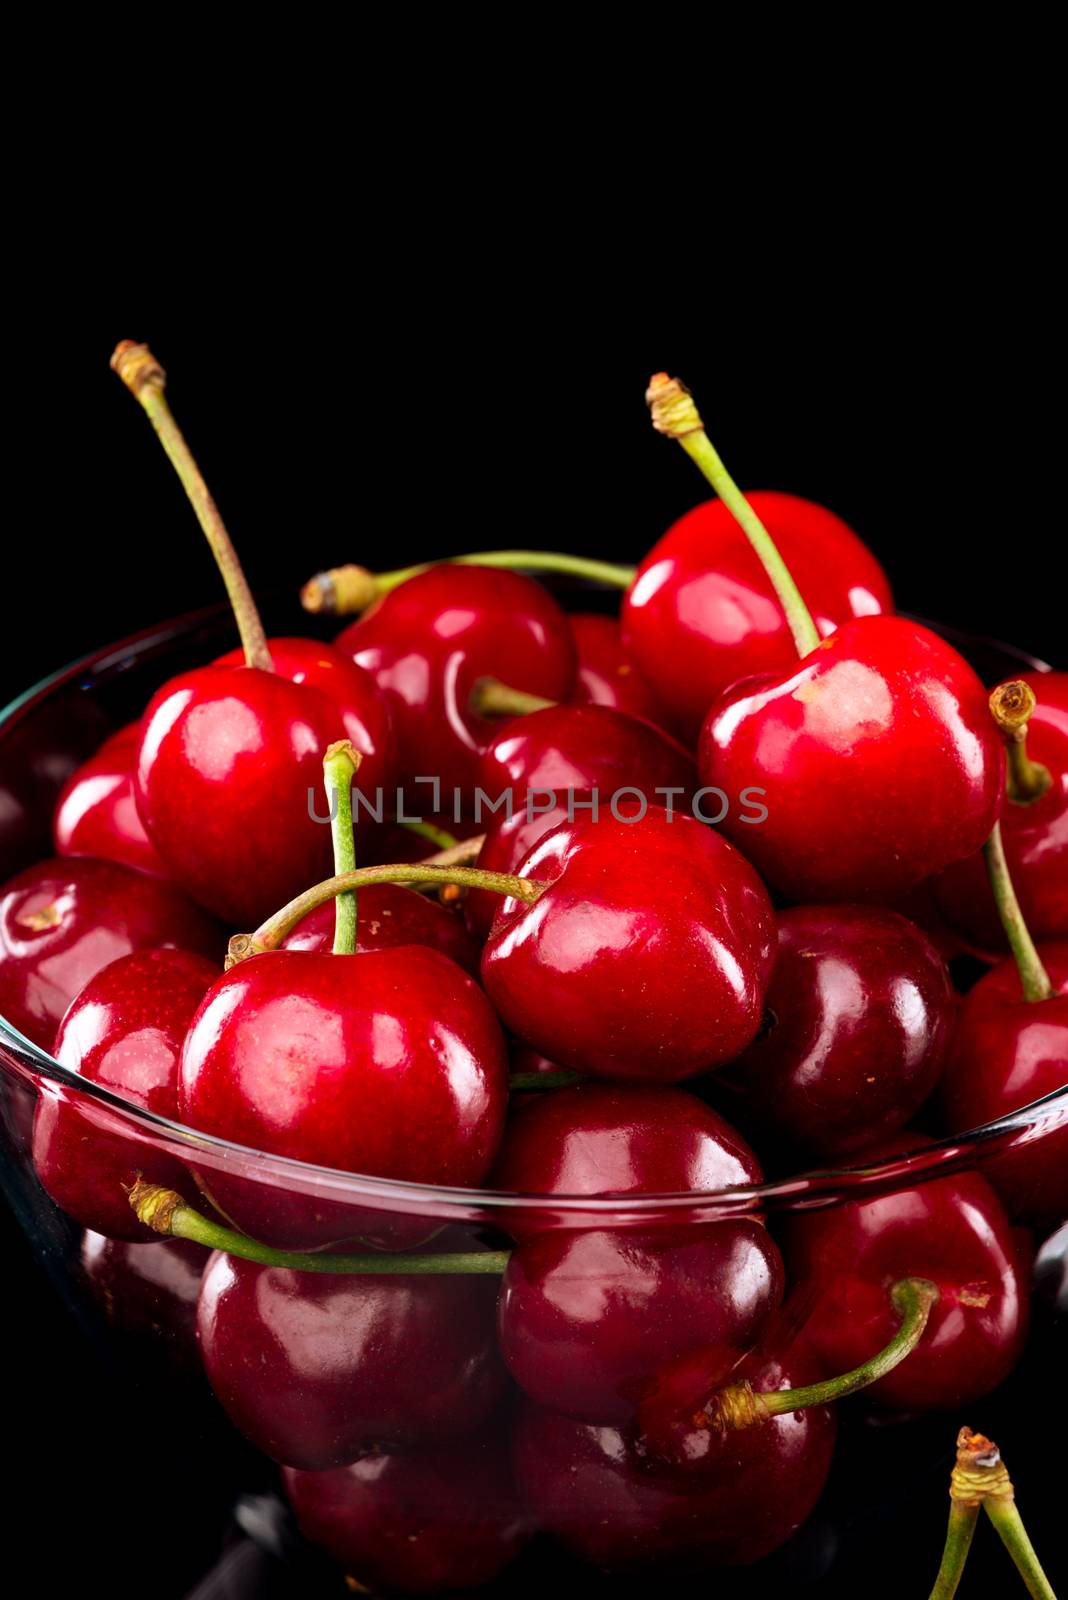 Juicy shiny cherries in a glass bowl on black background.